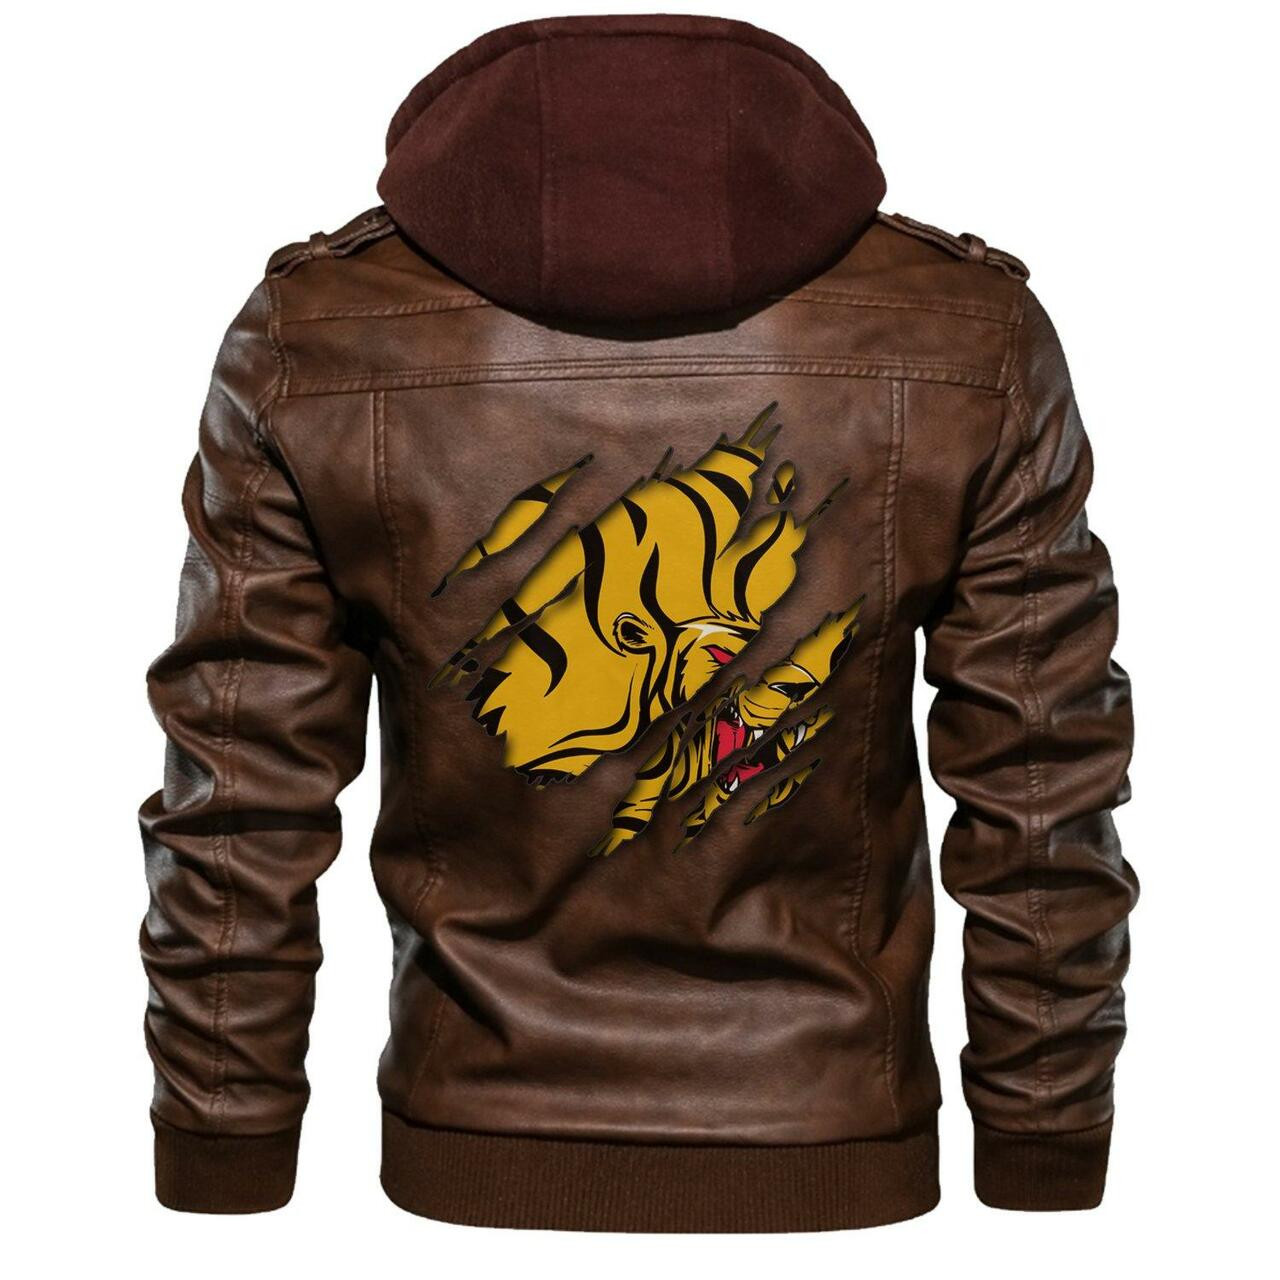 To get a great look, consider purchasing This New Leather Jacket 83